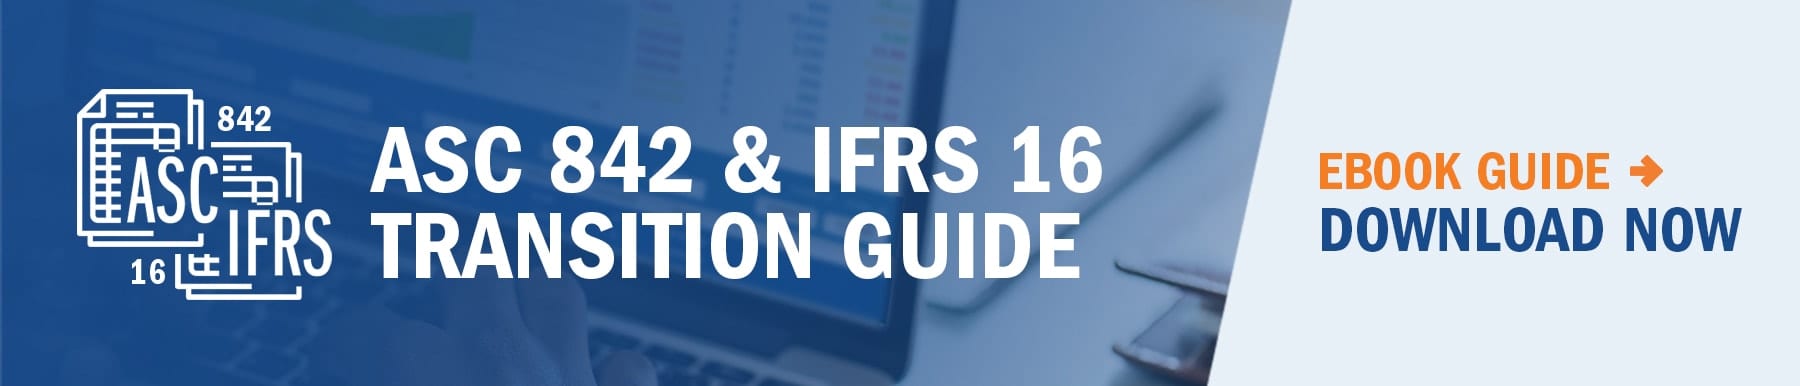 ASC842 and IFRS16 Transition Guide